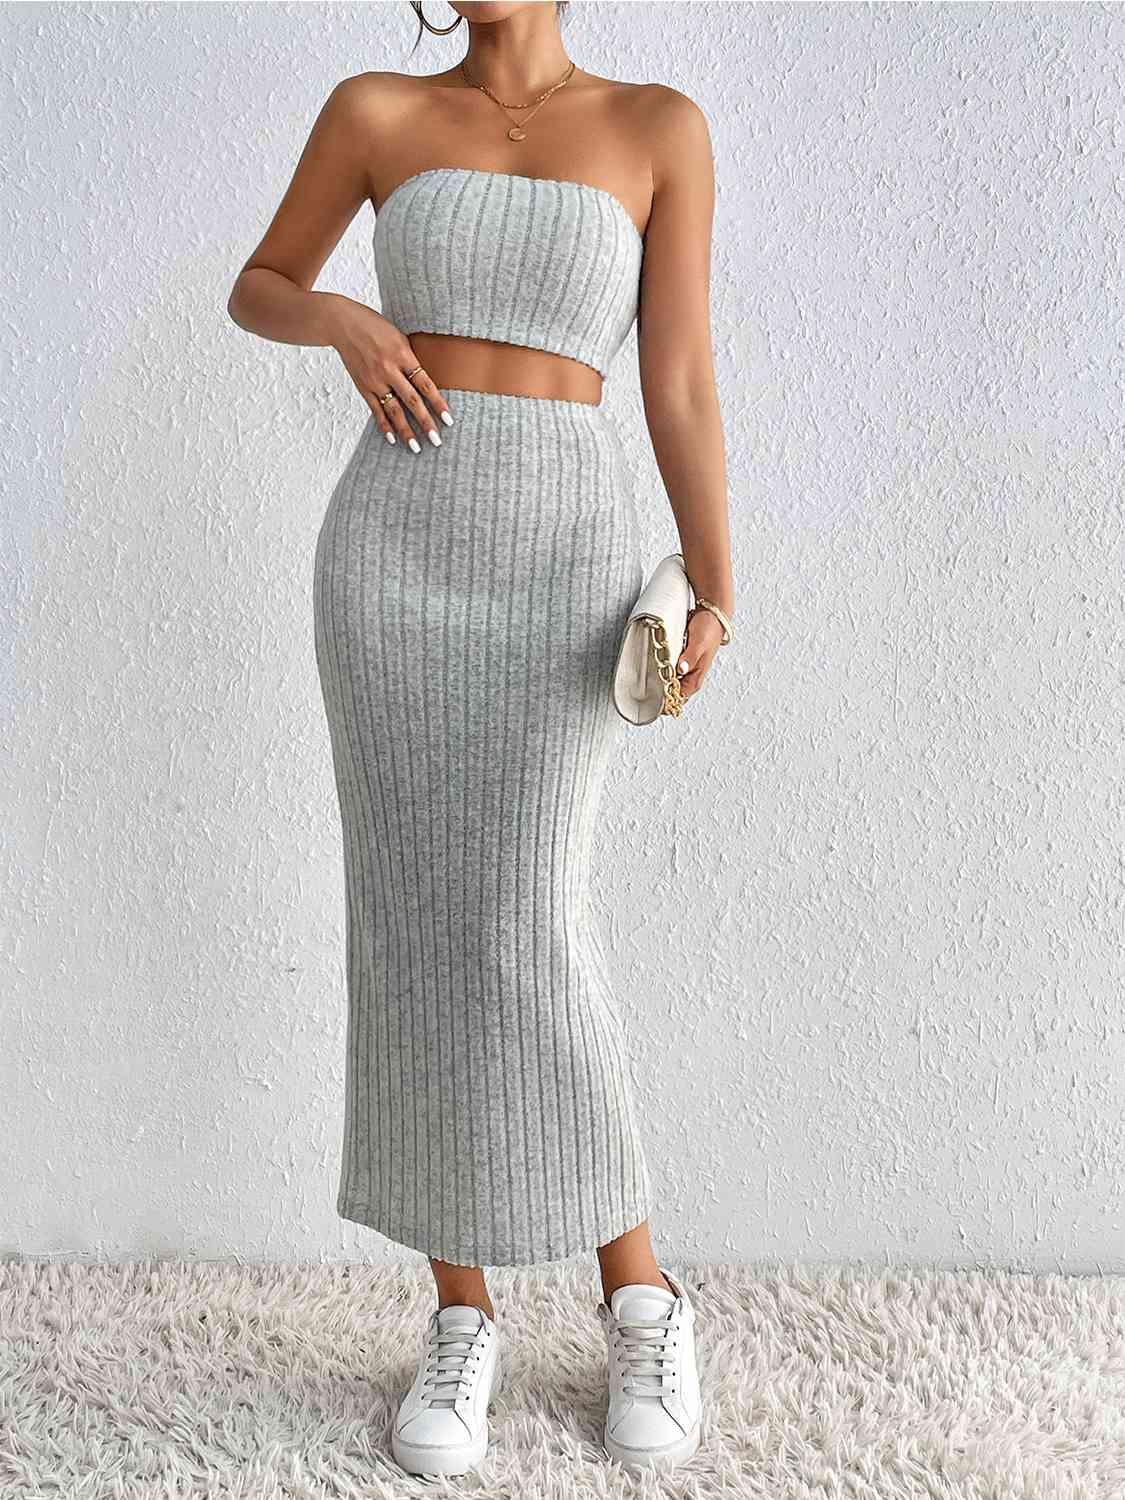 a woman wearing a grey two piece skirt and crop top